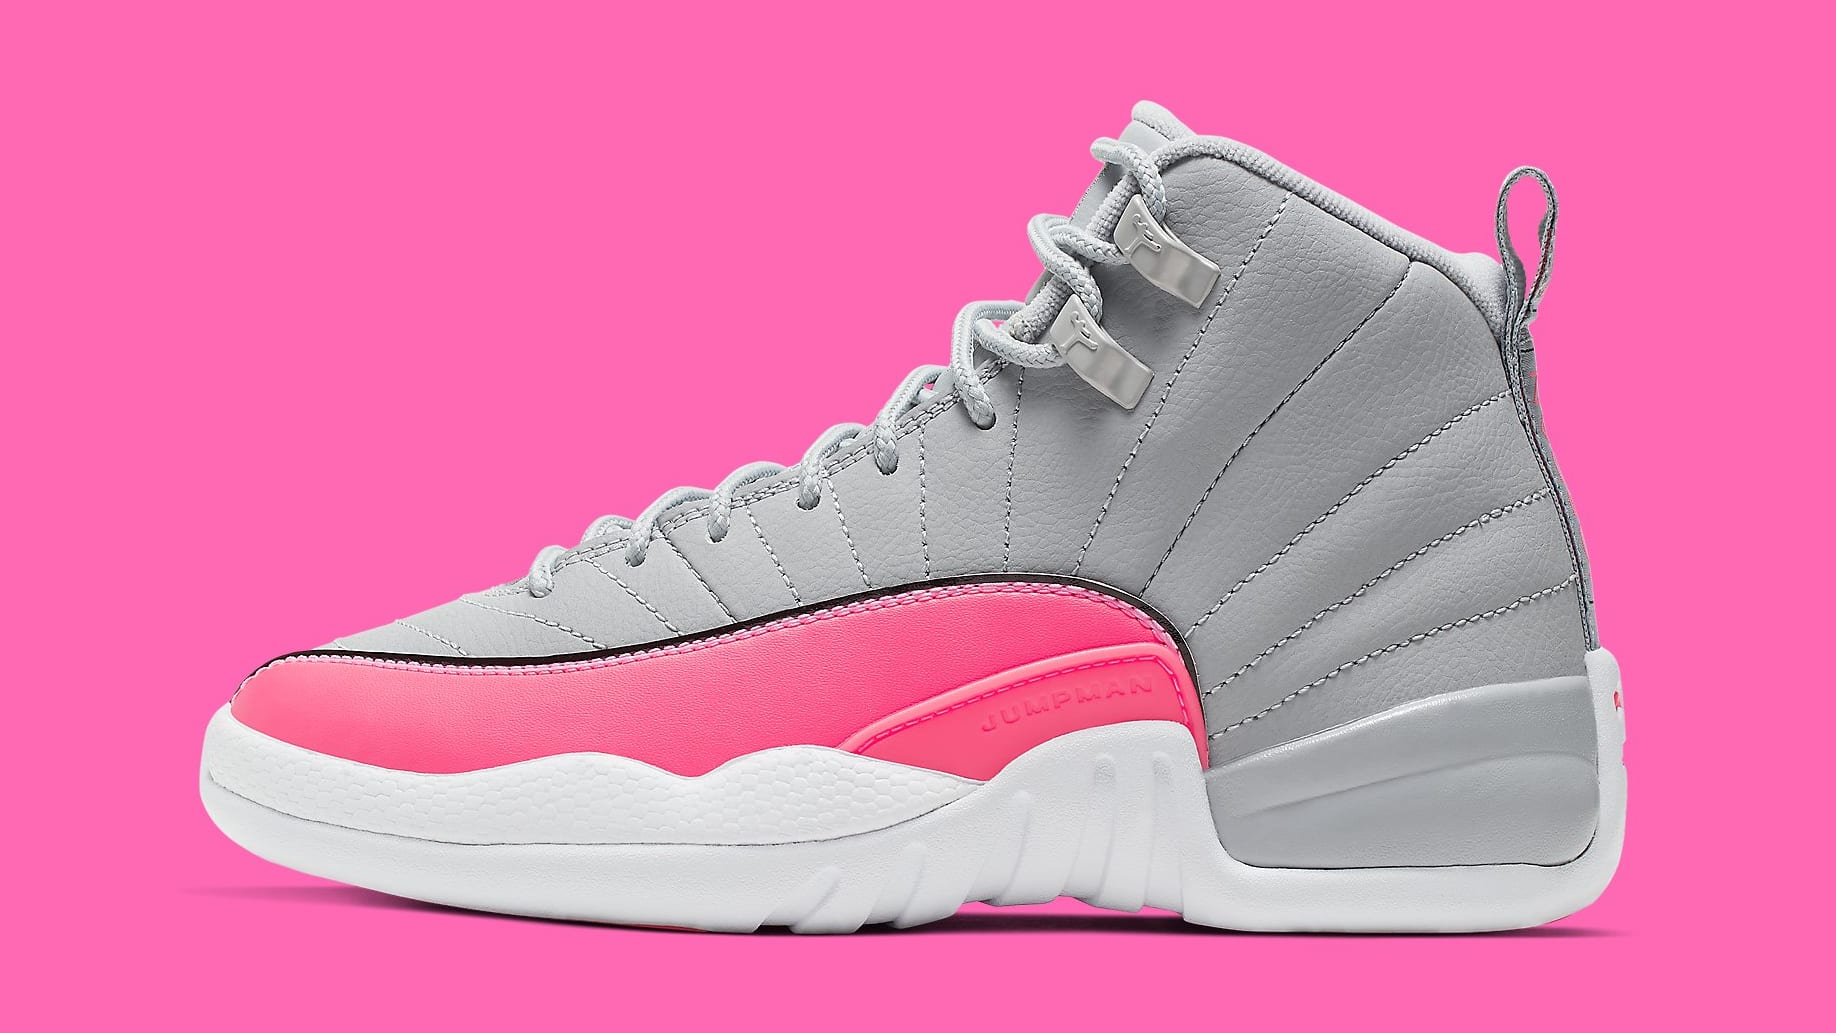 grey pink and white 12s